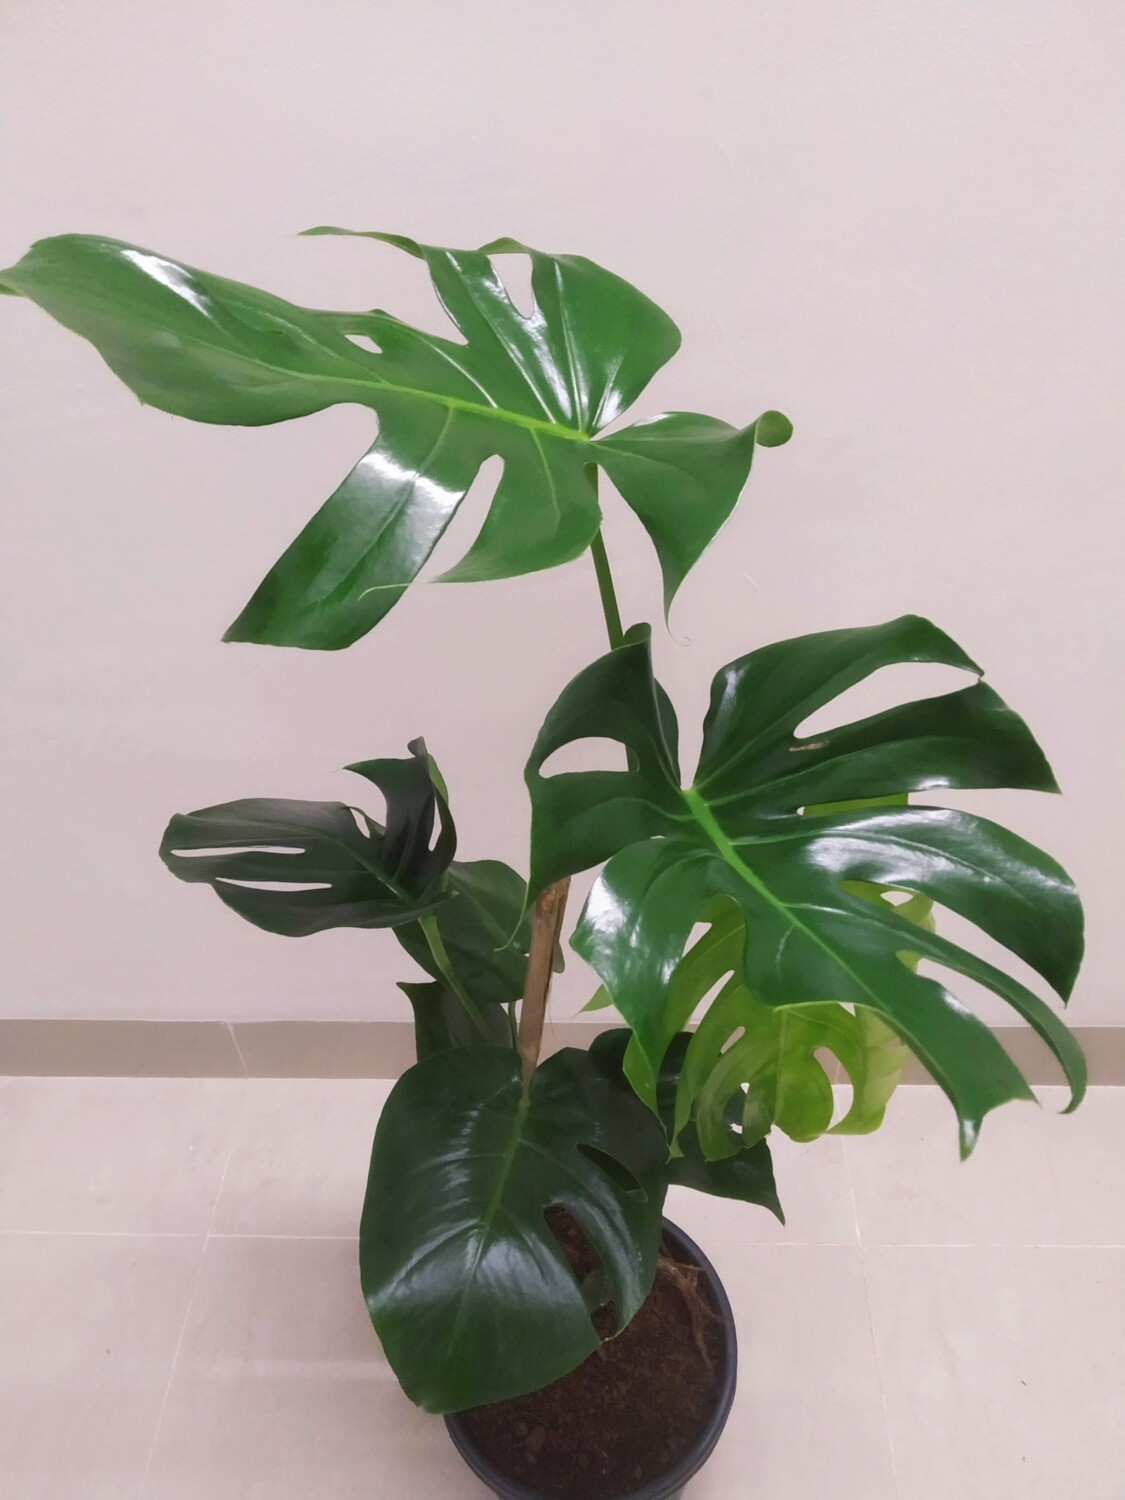 Monstera Plant with Stick in 10 inches Nursery Pot- 2 Feet Height